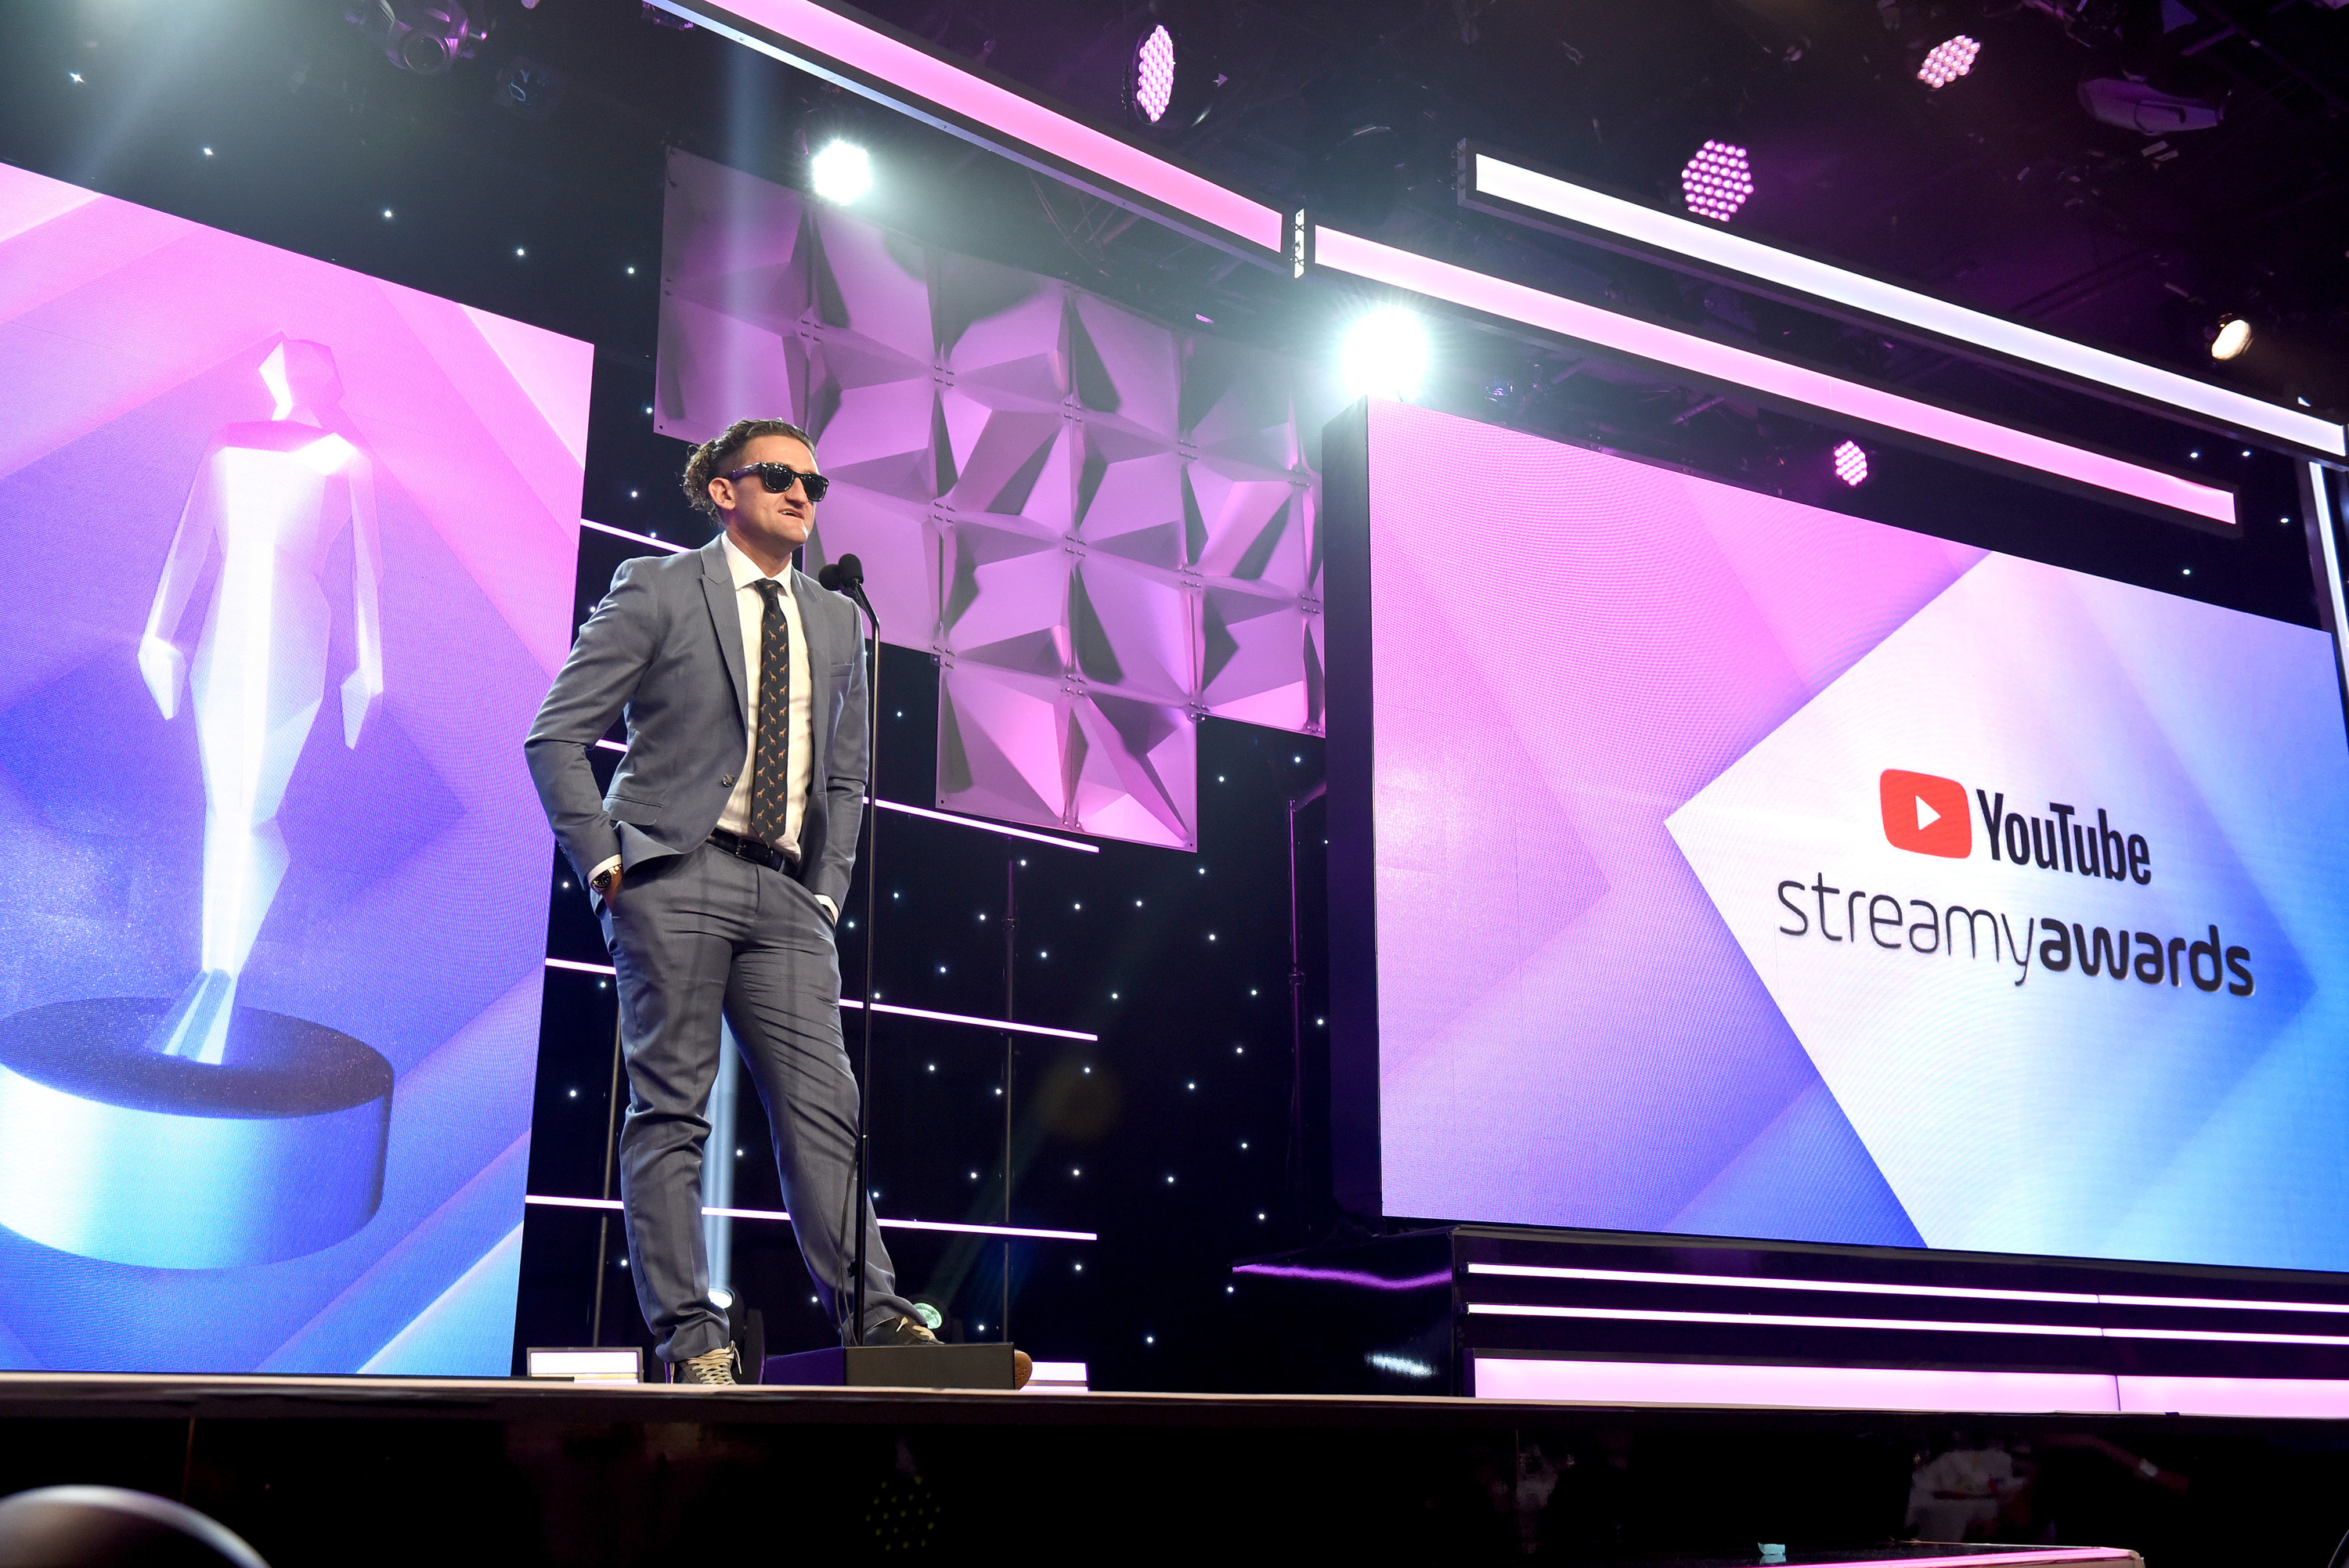 Casey speaking onstage at the YouTube Streamy Awards